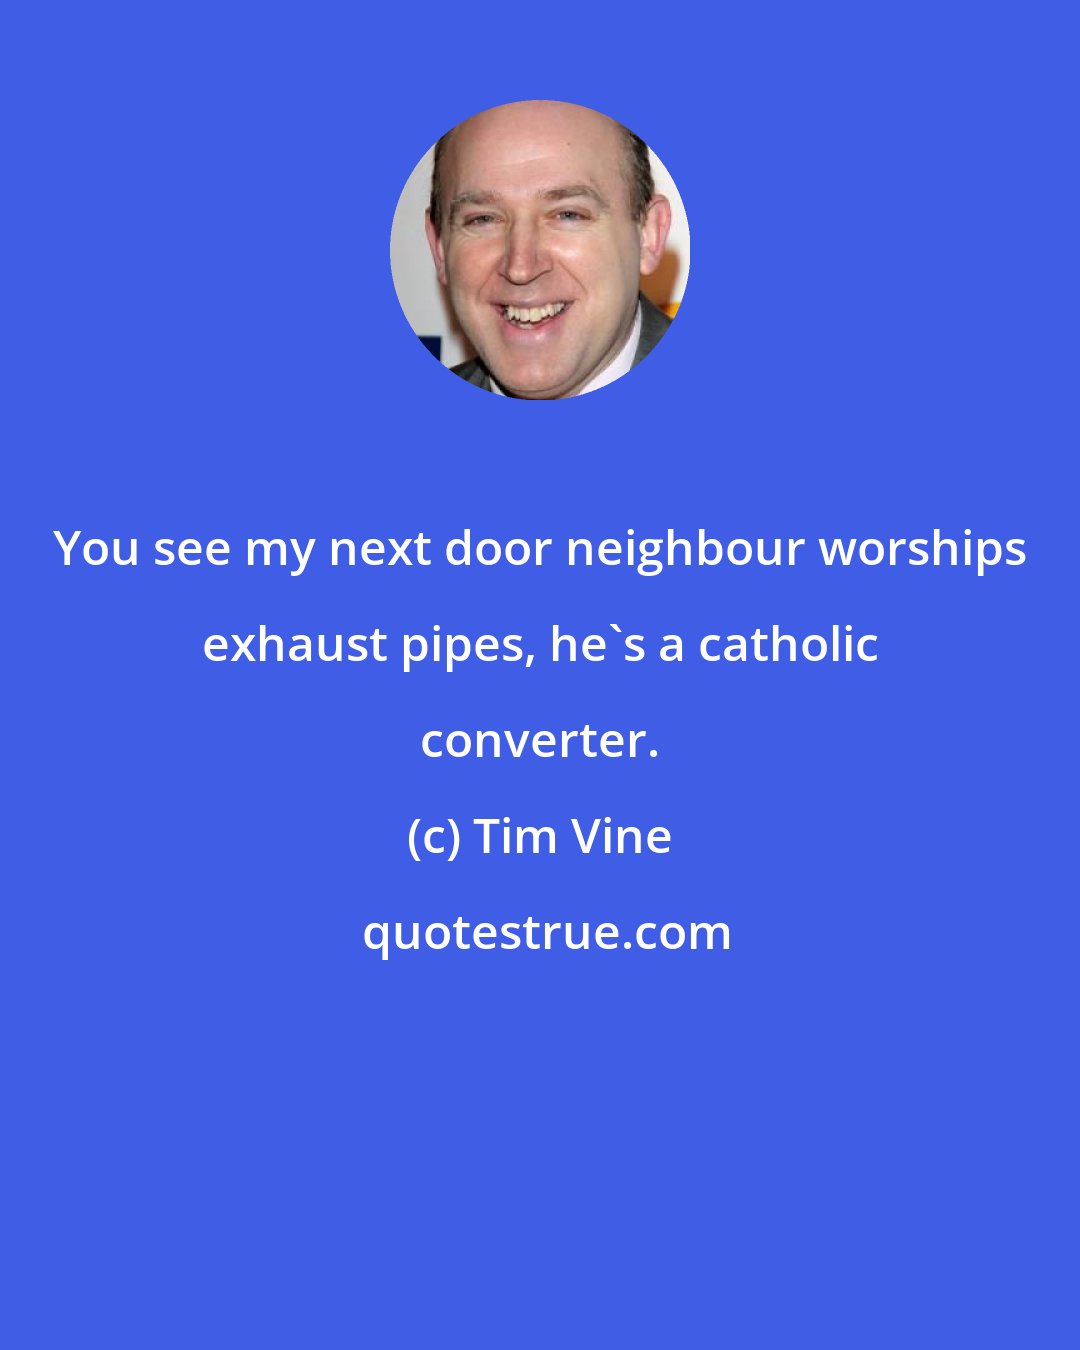 Tim Vine: You see my next door neighbour worships exhaust pipes, he's a catholic converter.